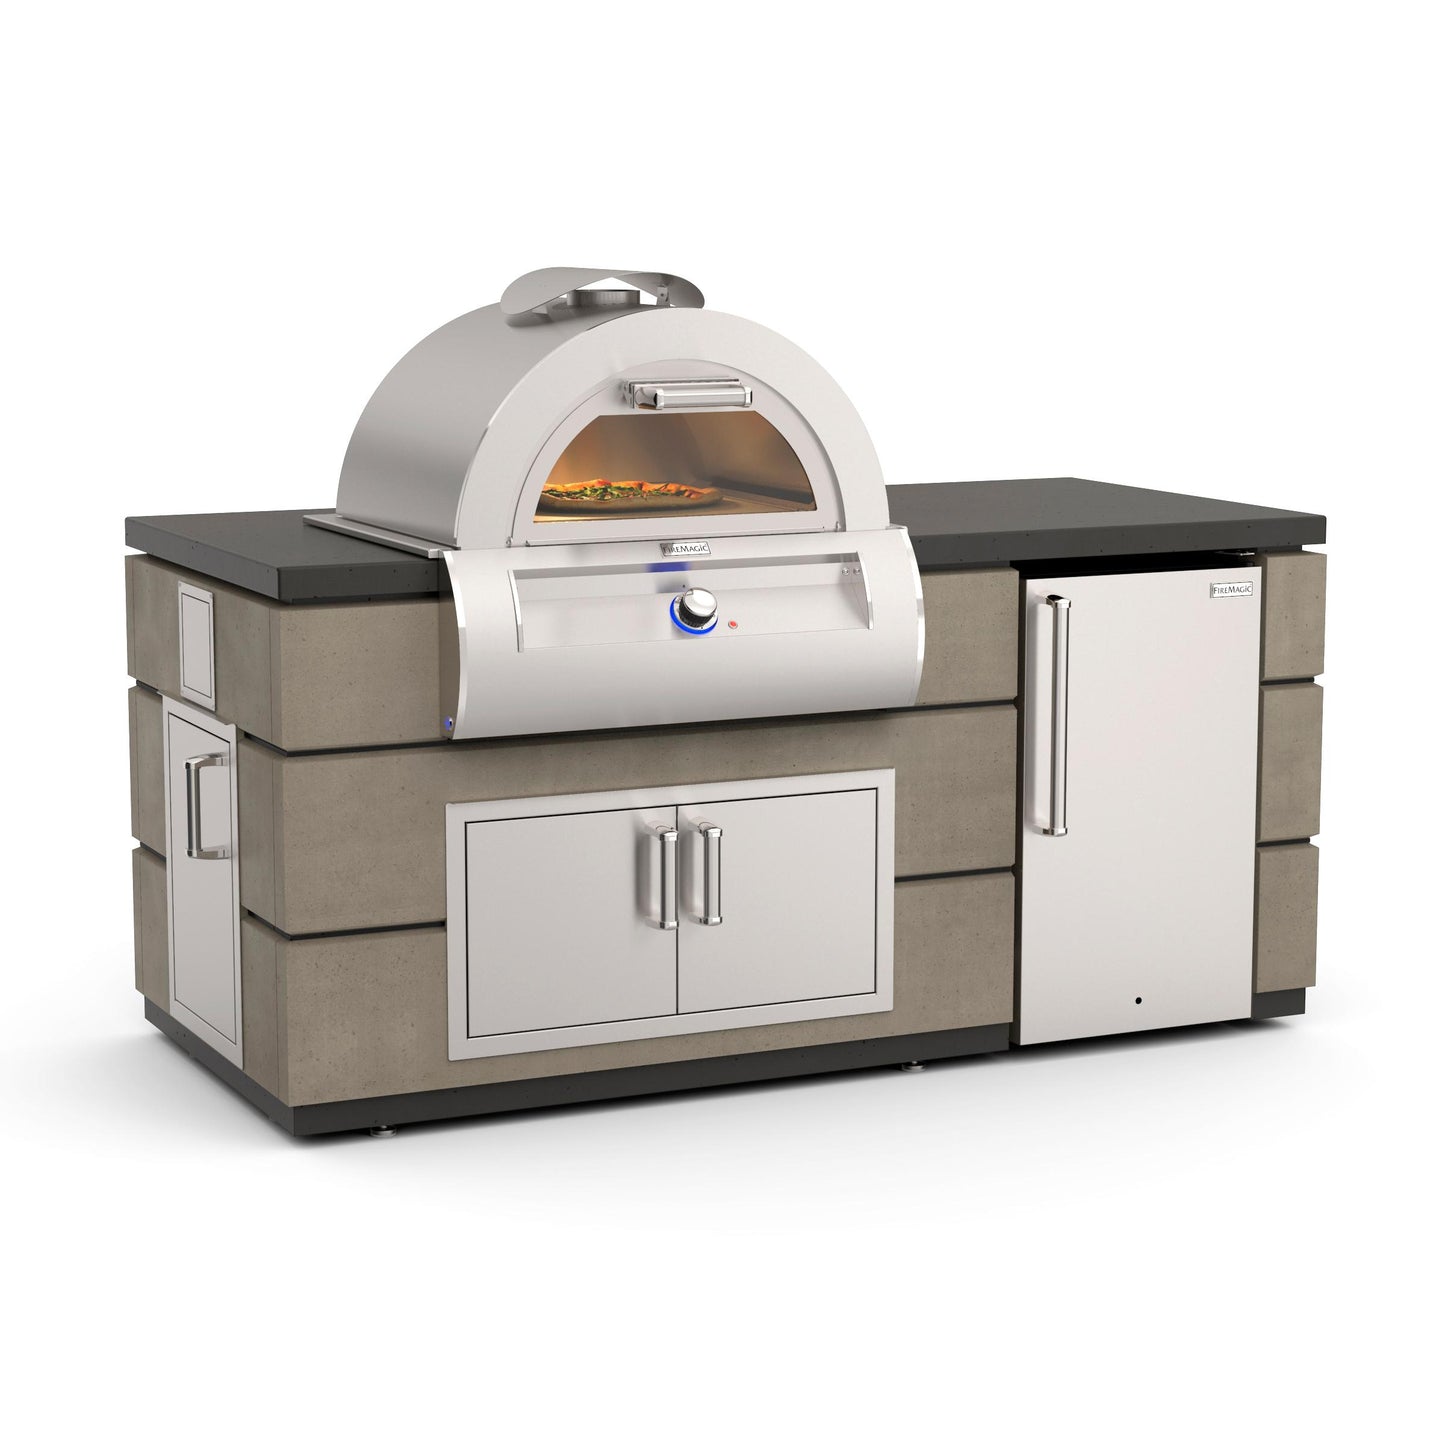 Fire Magic ID660WAR77BA Contemporary Pre-Fab Pizza Oven Island Components Sold Separately